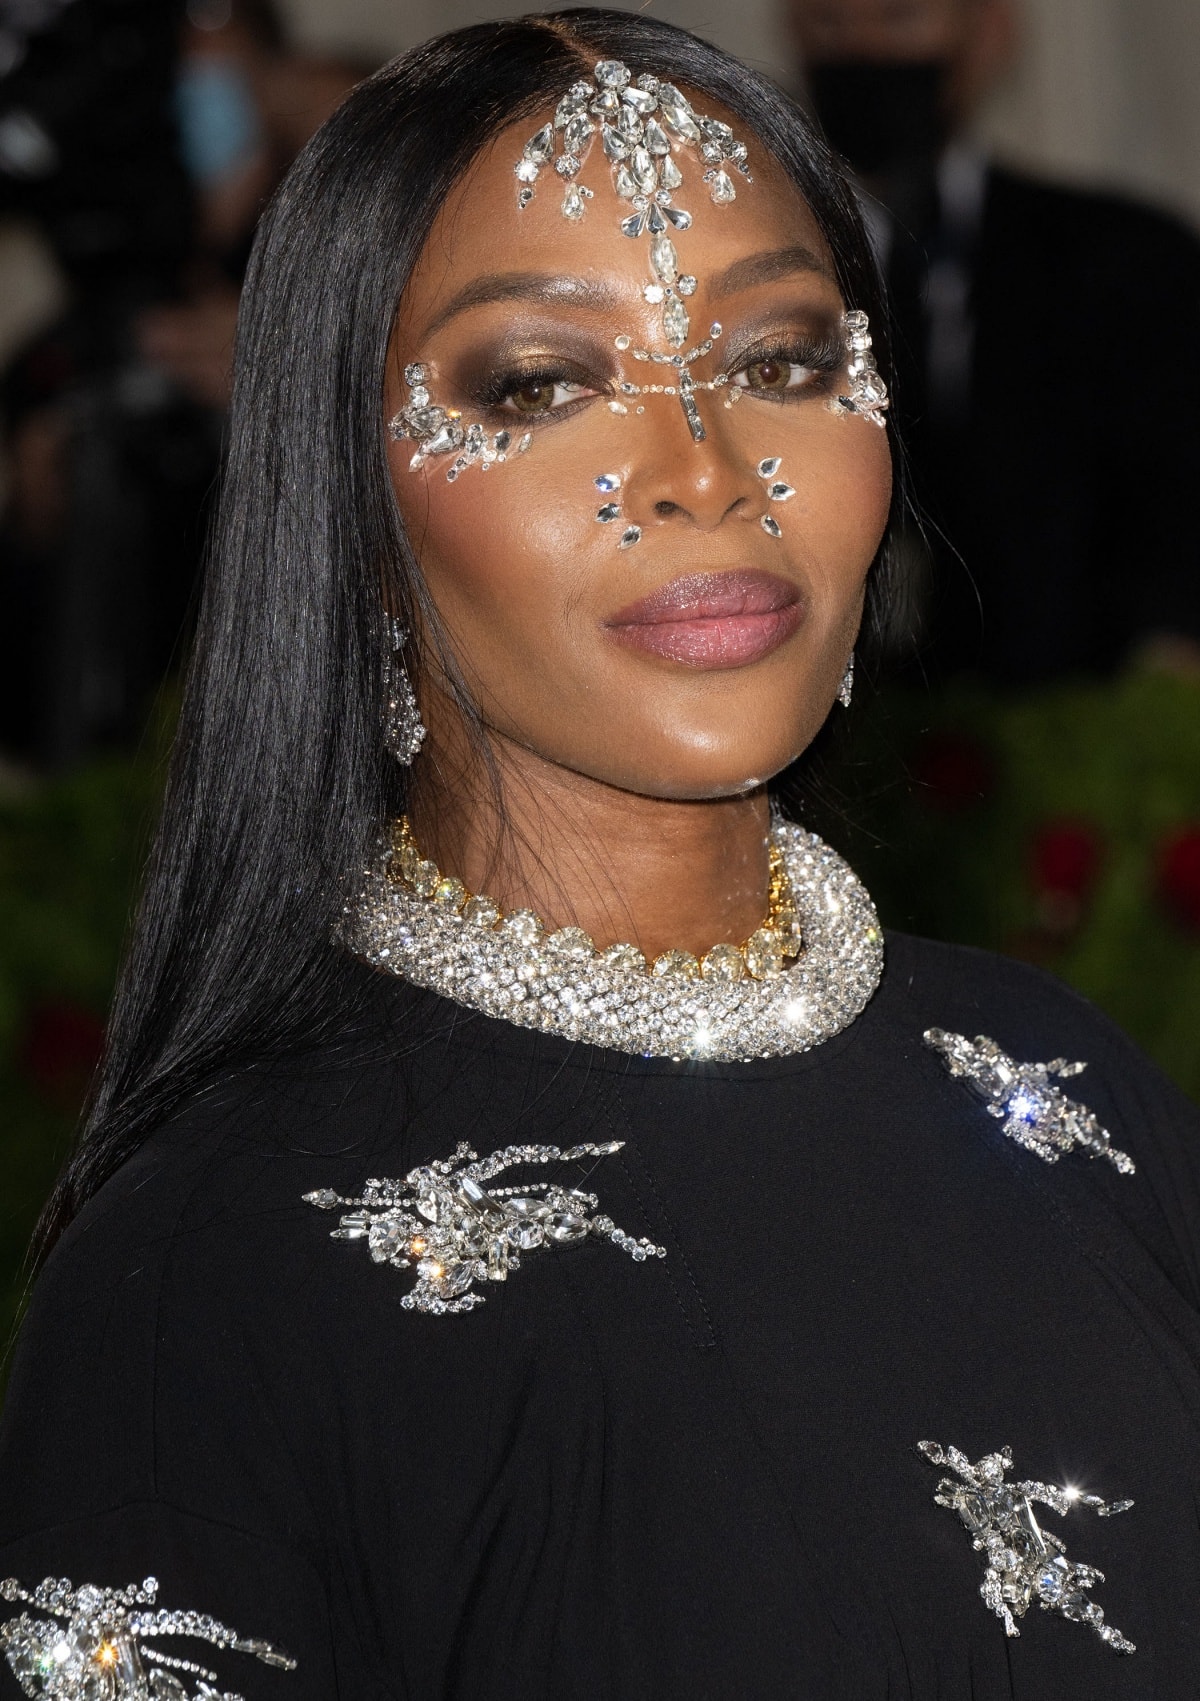 Naomi Campbell wearing facial jewels and a 6.6 million-dollar Jacob & Co. necklace at the 2022 Met Gala